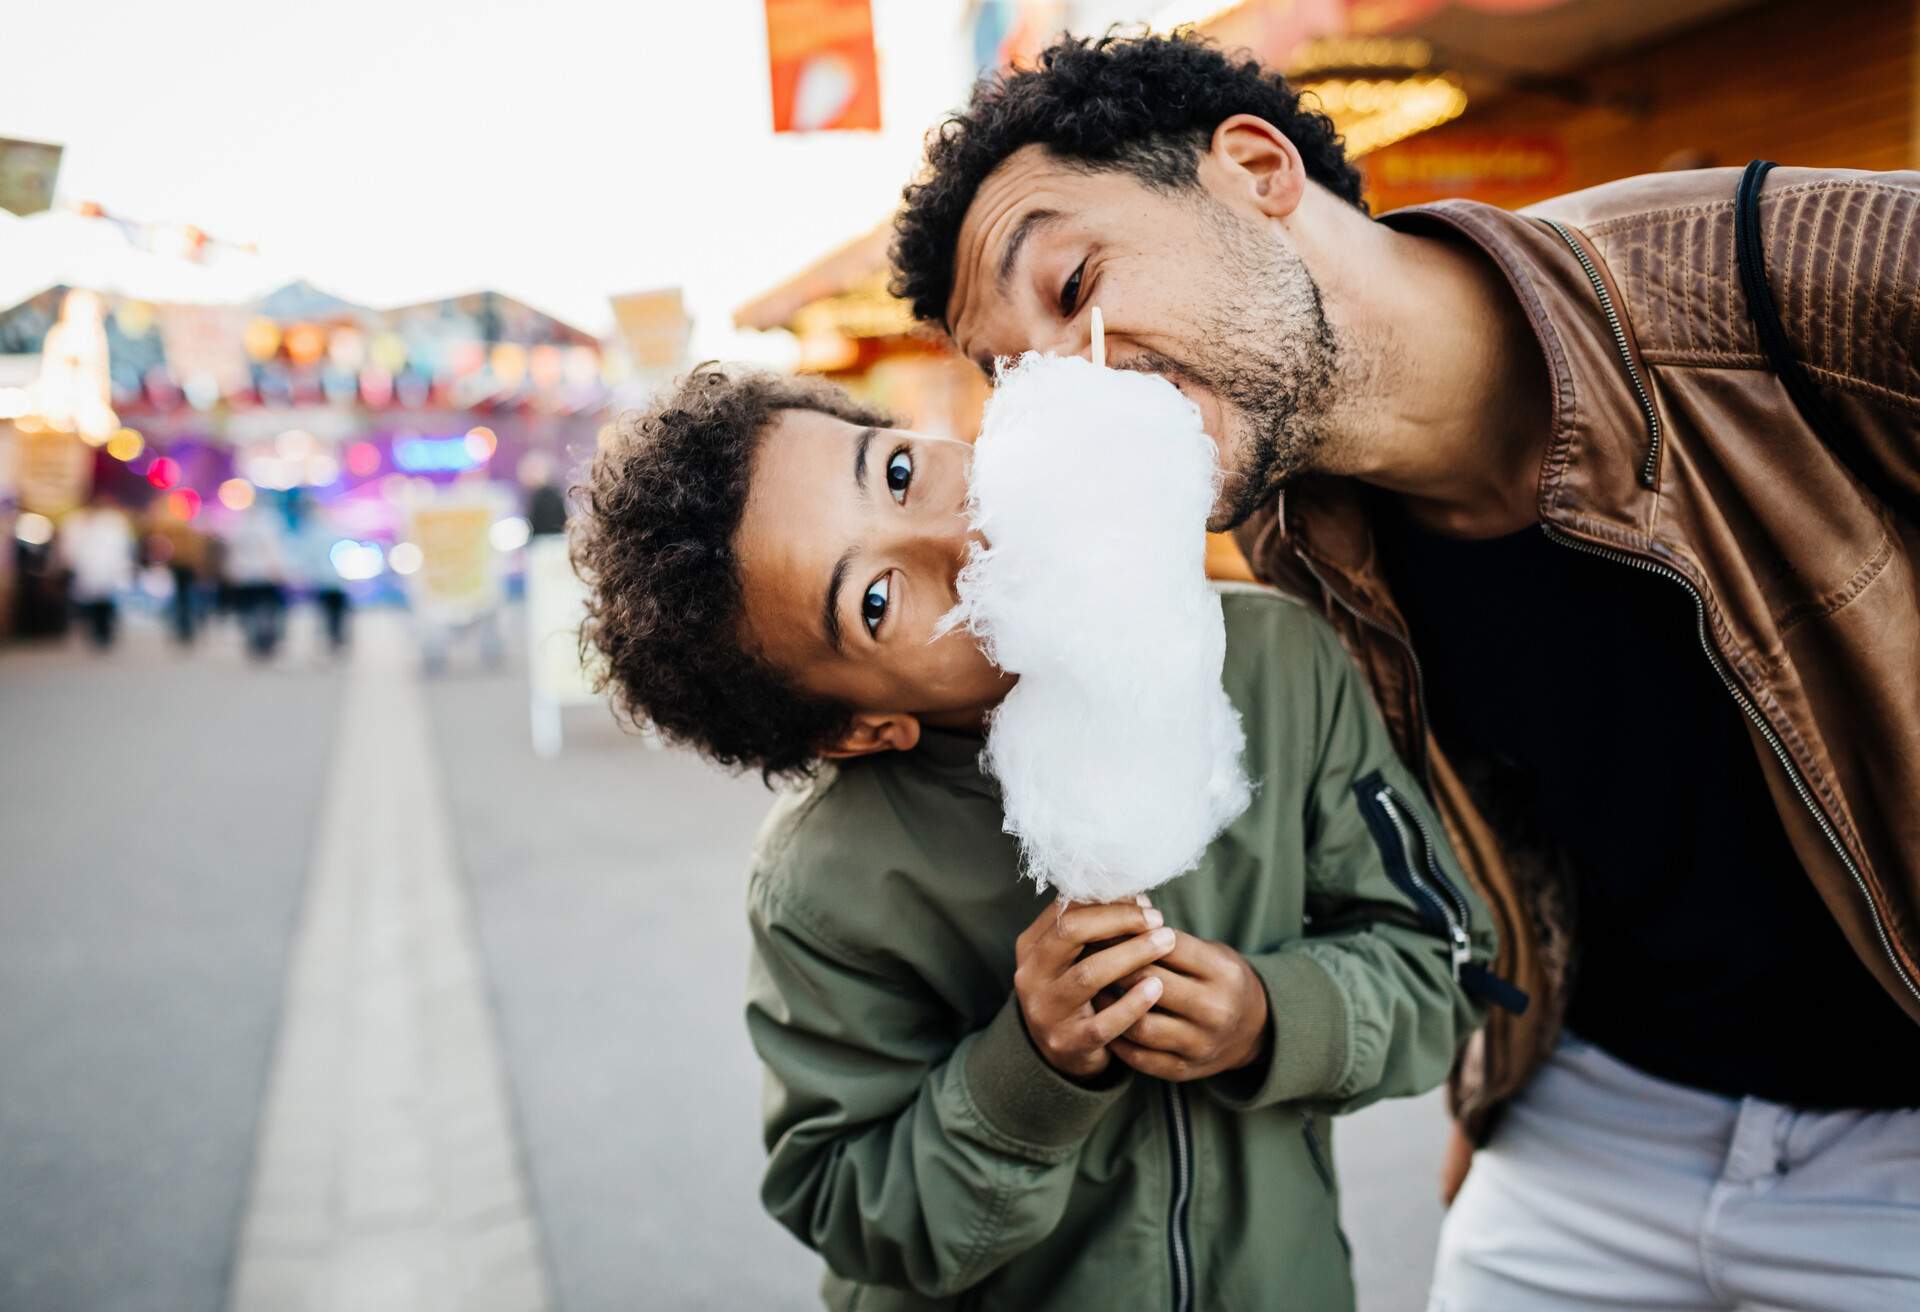 A playful father and son sharing a bloom of candy floss while spending the day at the fun fair together.